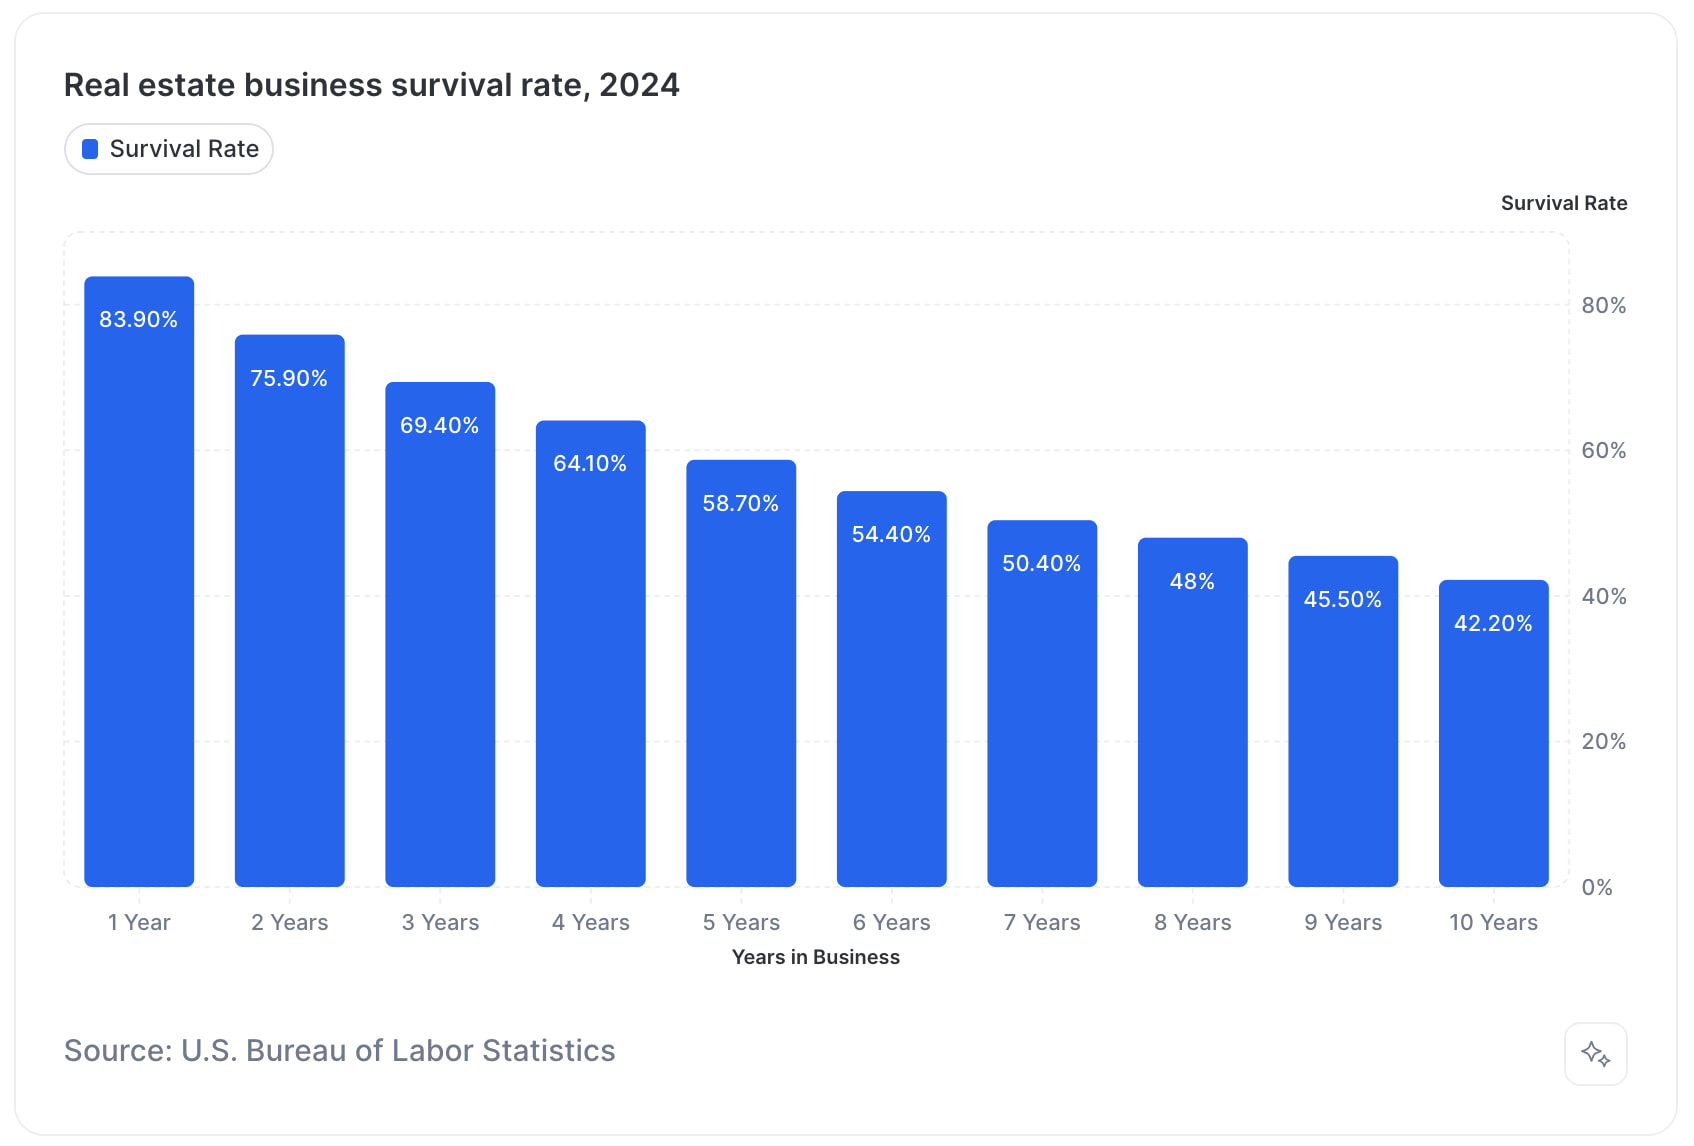 Chart showing the survival rate of real estate businesses